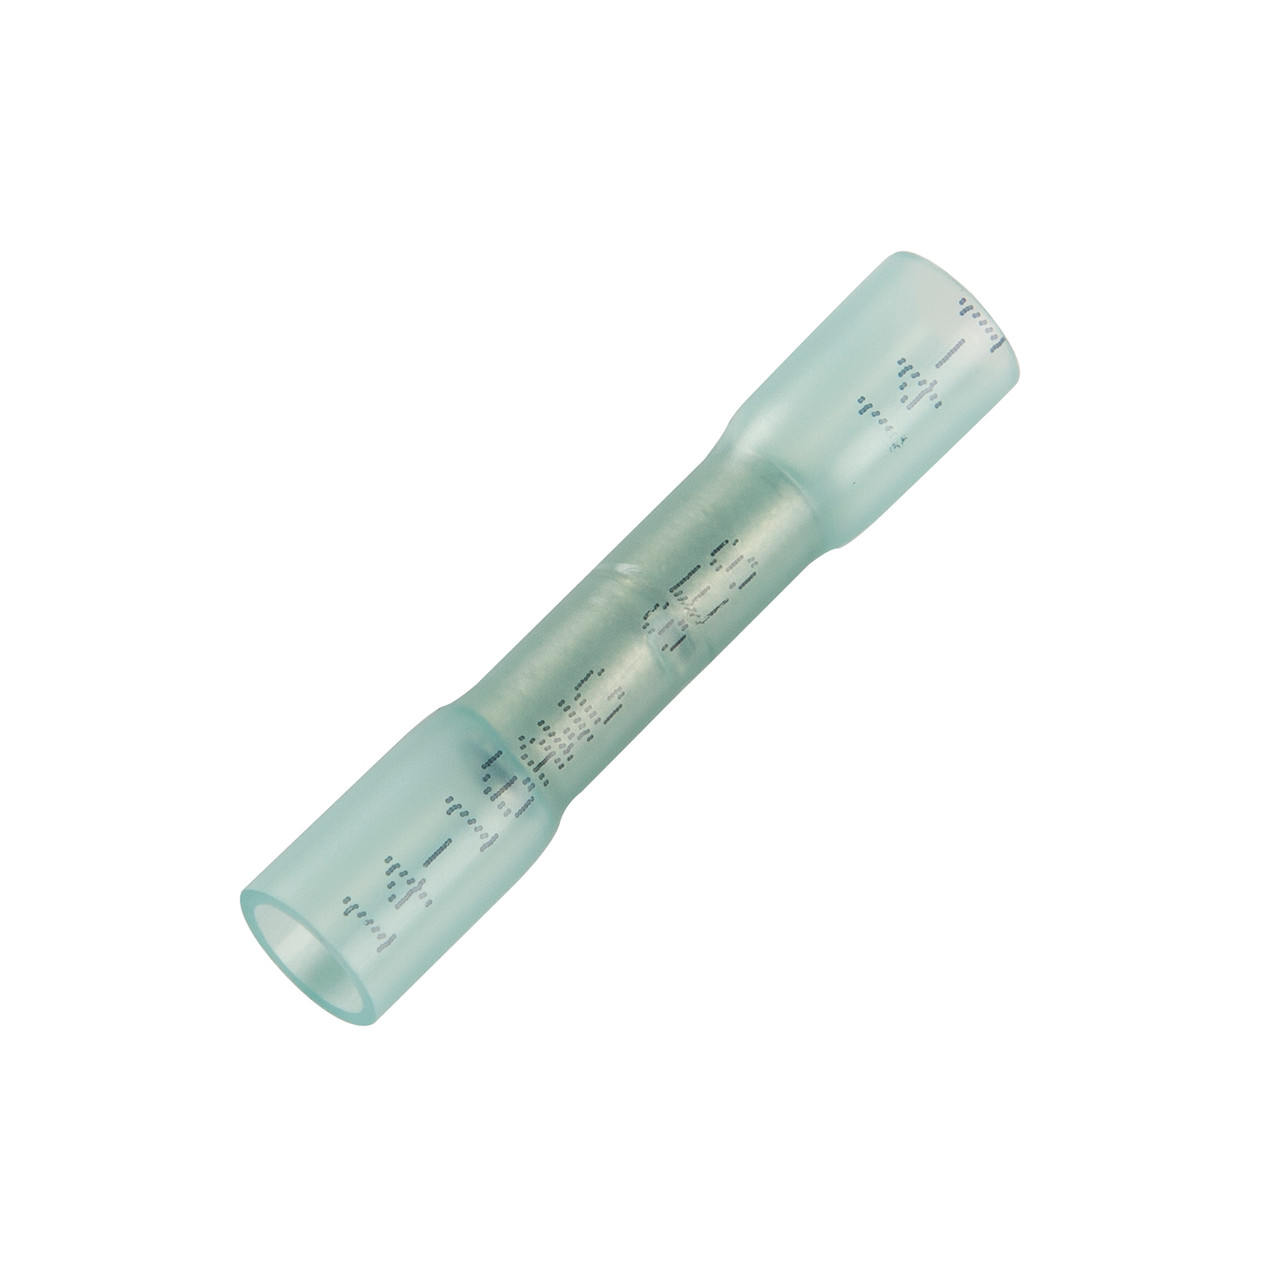 16 - 14 AWG Heat Shrinkable Butt Connectors - Polyolefin @ 100 Pack - Blue  83-3350